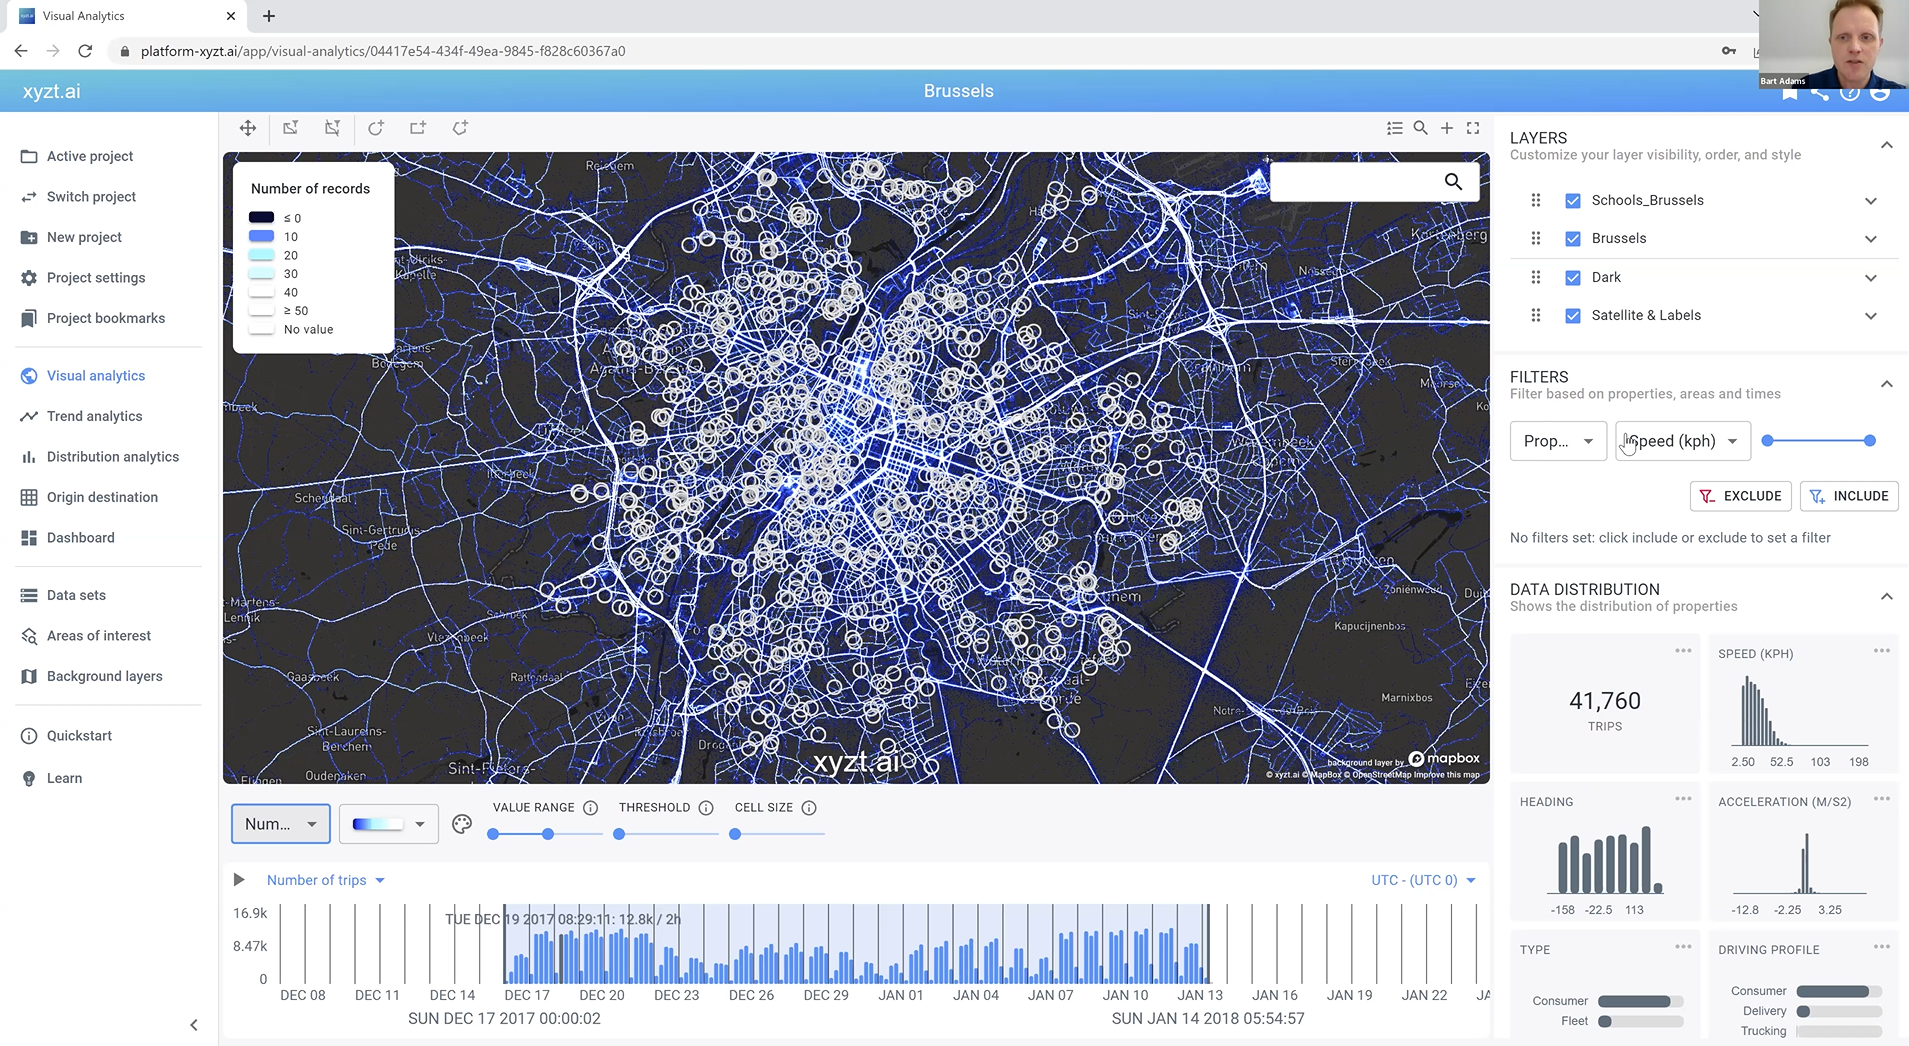 Schools of Brussels visualized as areas of interest (circles) on top of trips data.